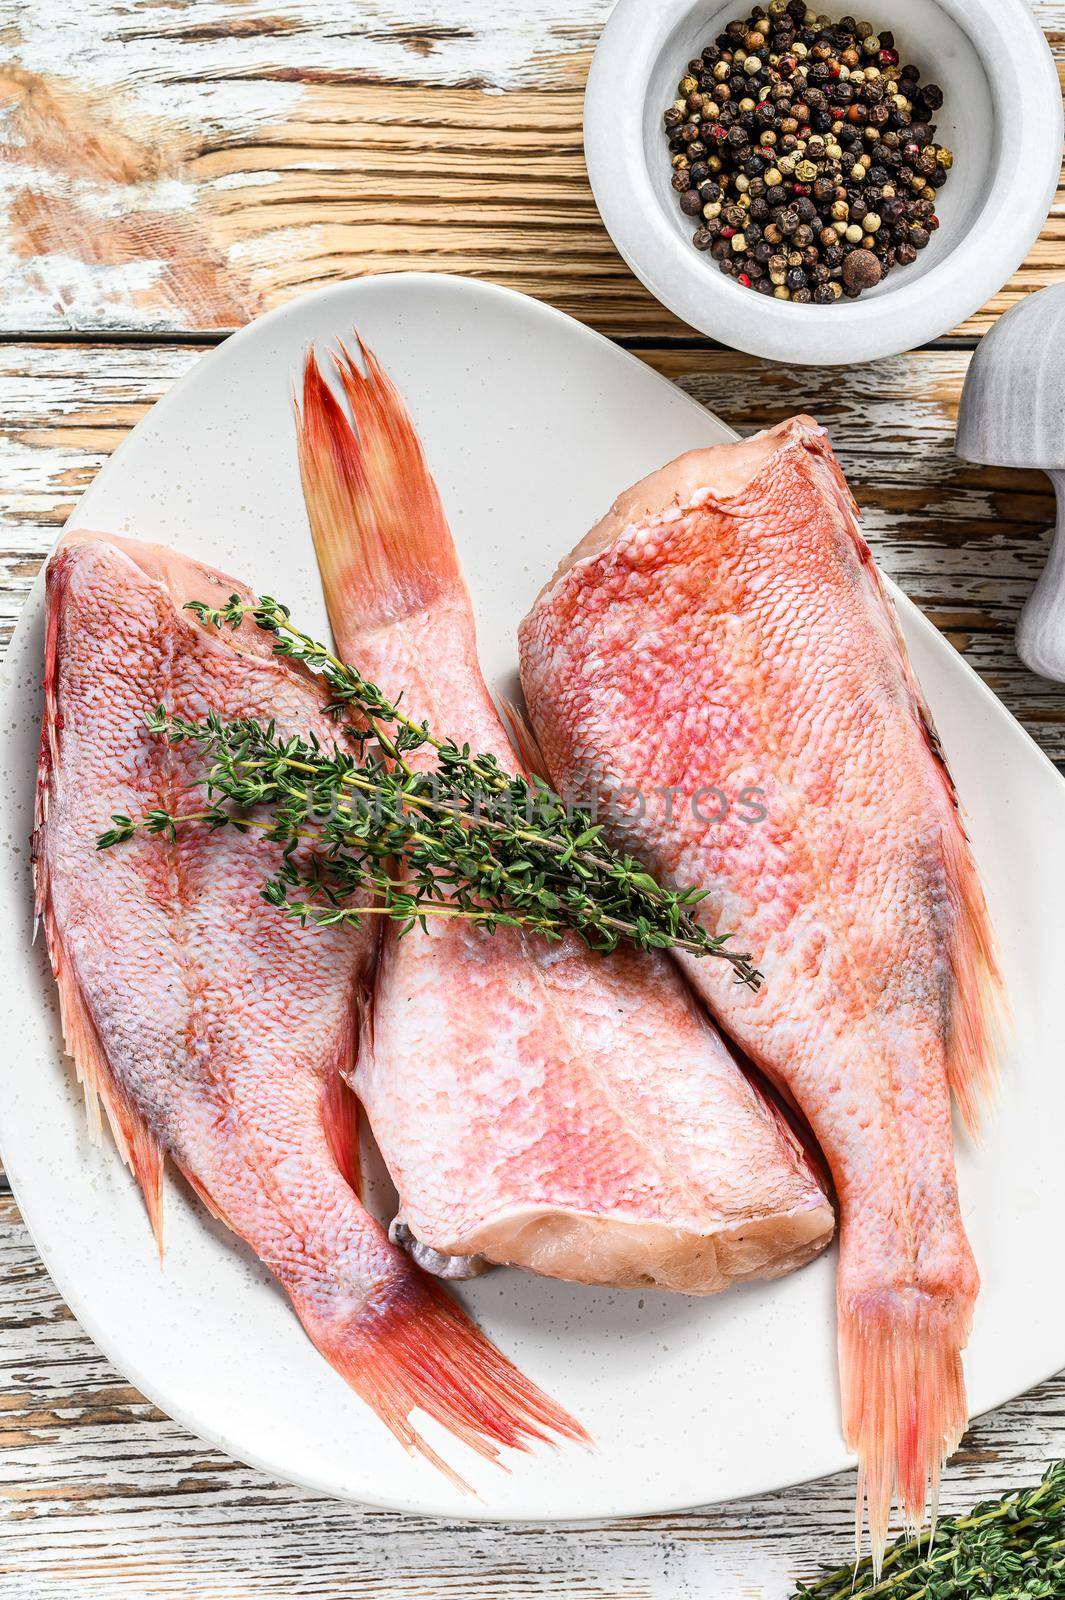 Whole raw red perch or sea bass fish on a plate. White wooden background. Top view.